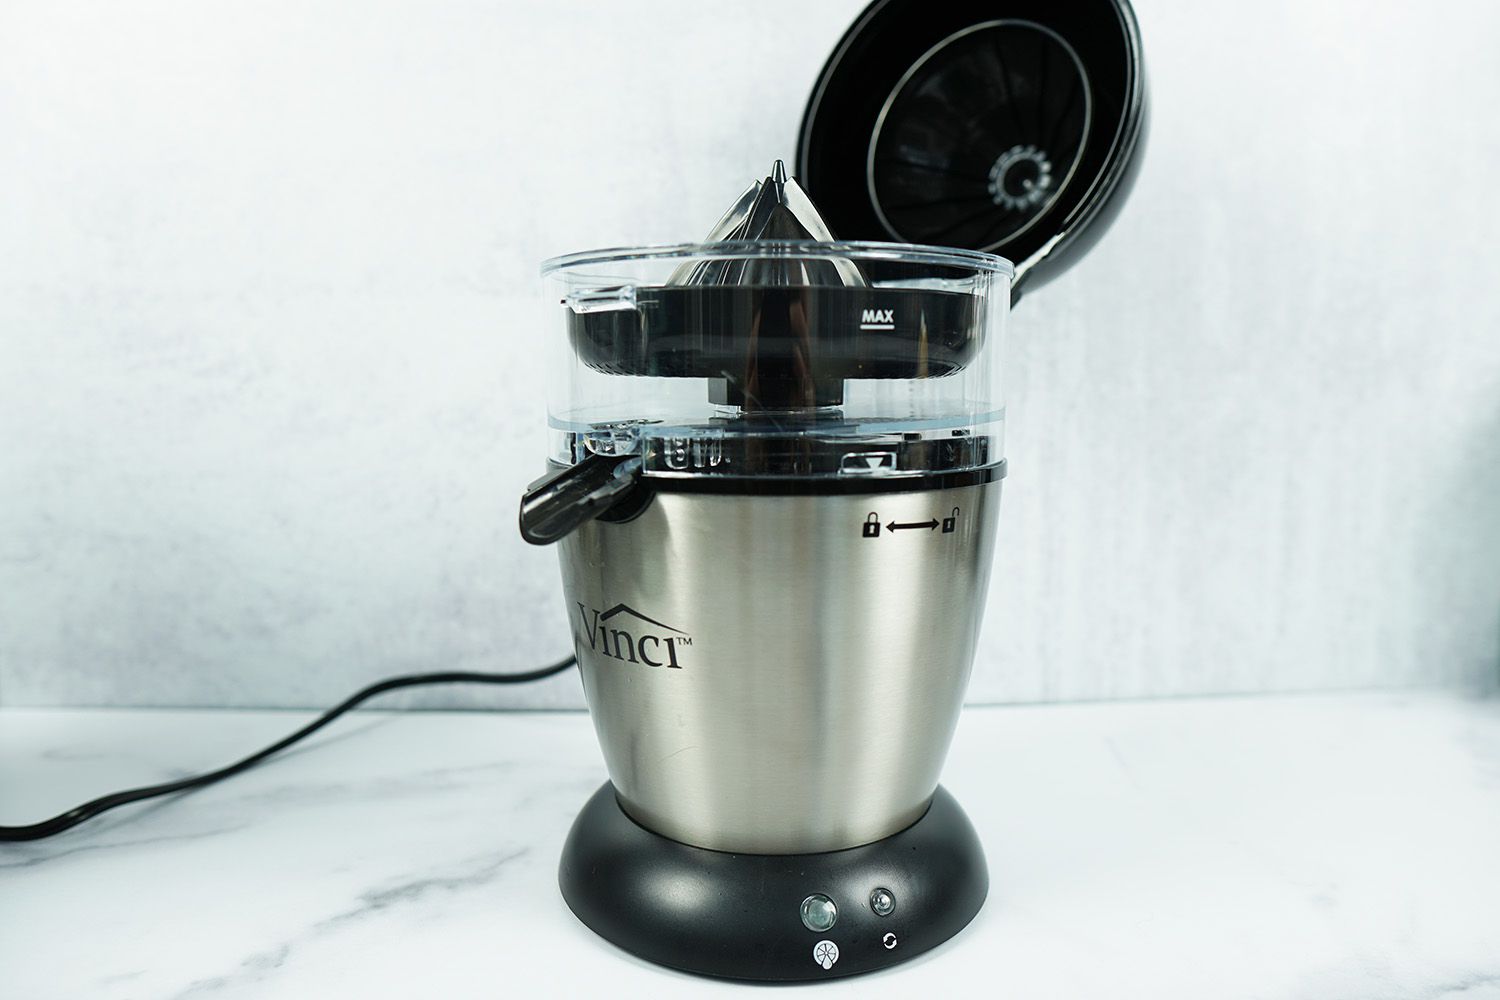 a Vinci electric citrus juicer with its hinged lid open